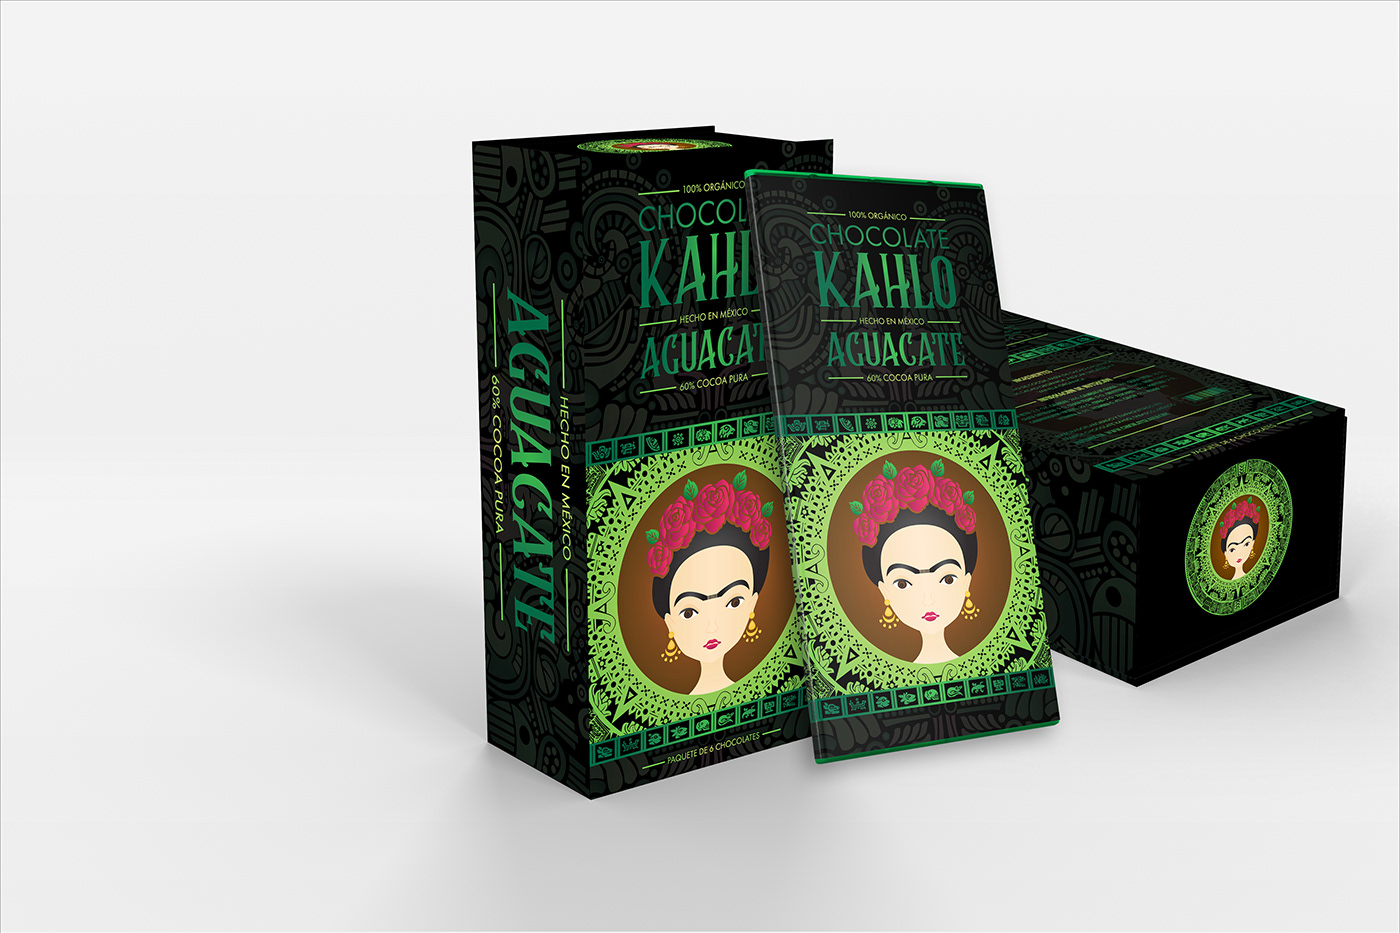 aztec chocolate Frida Kahlo aguacate chipotle fictional mexico mezcal Packaging product design 